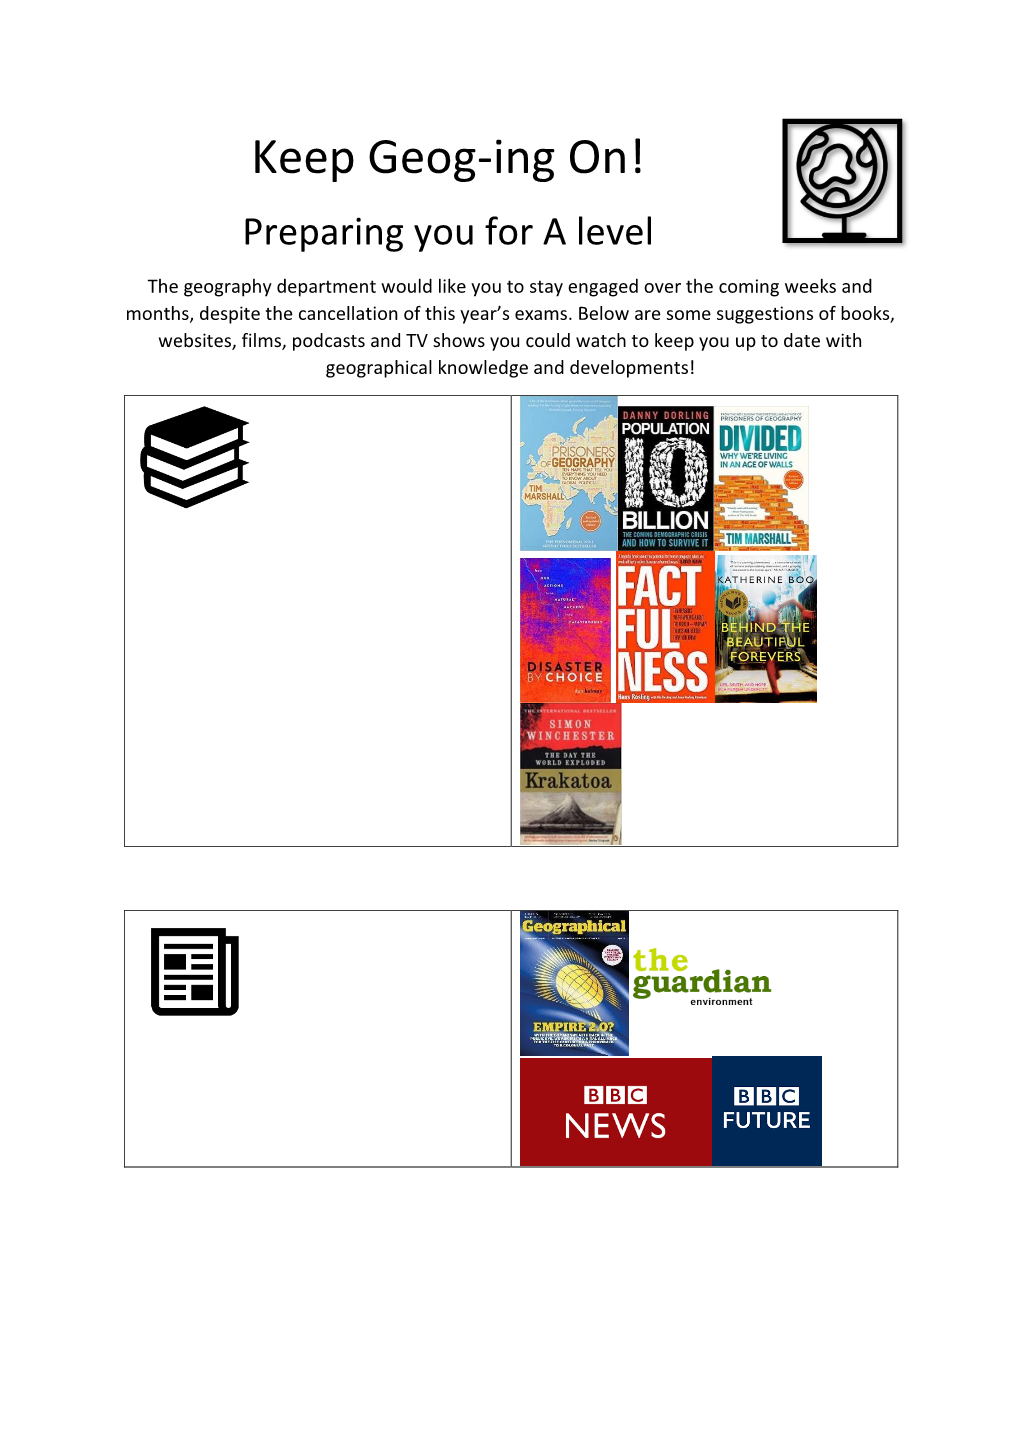 Keep Geog-Ing On! Preparing You for a Level